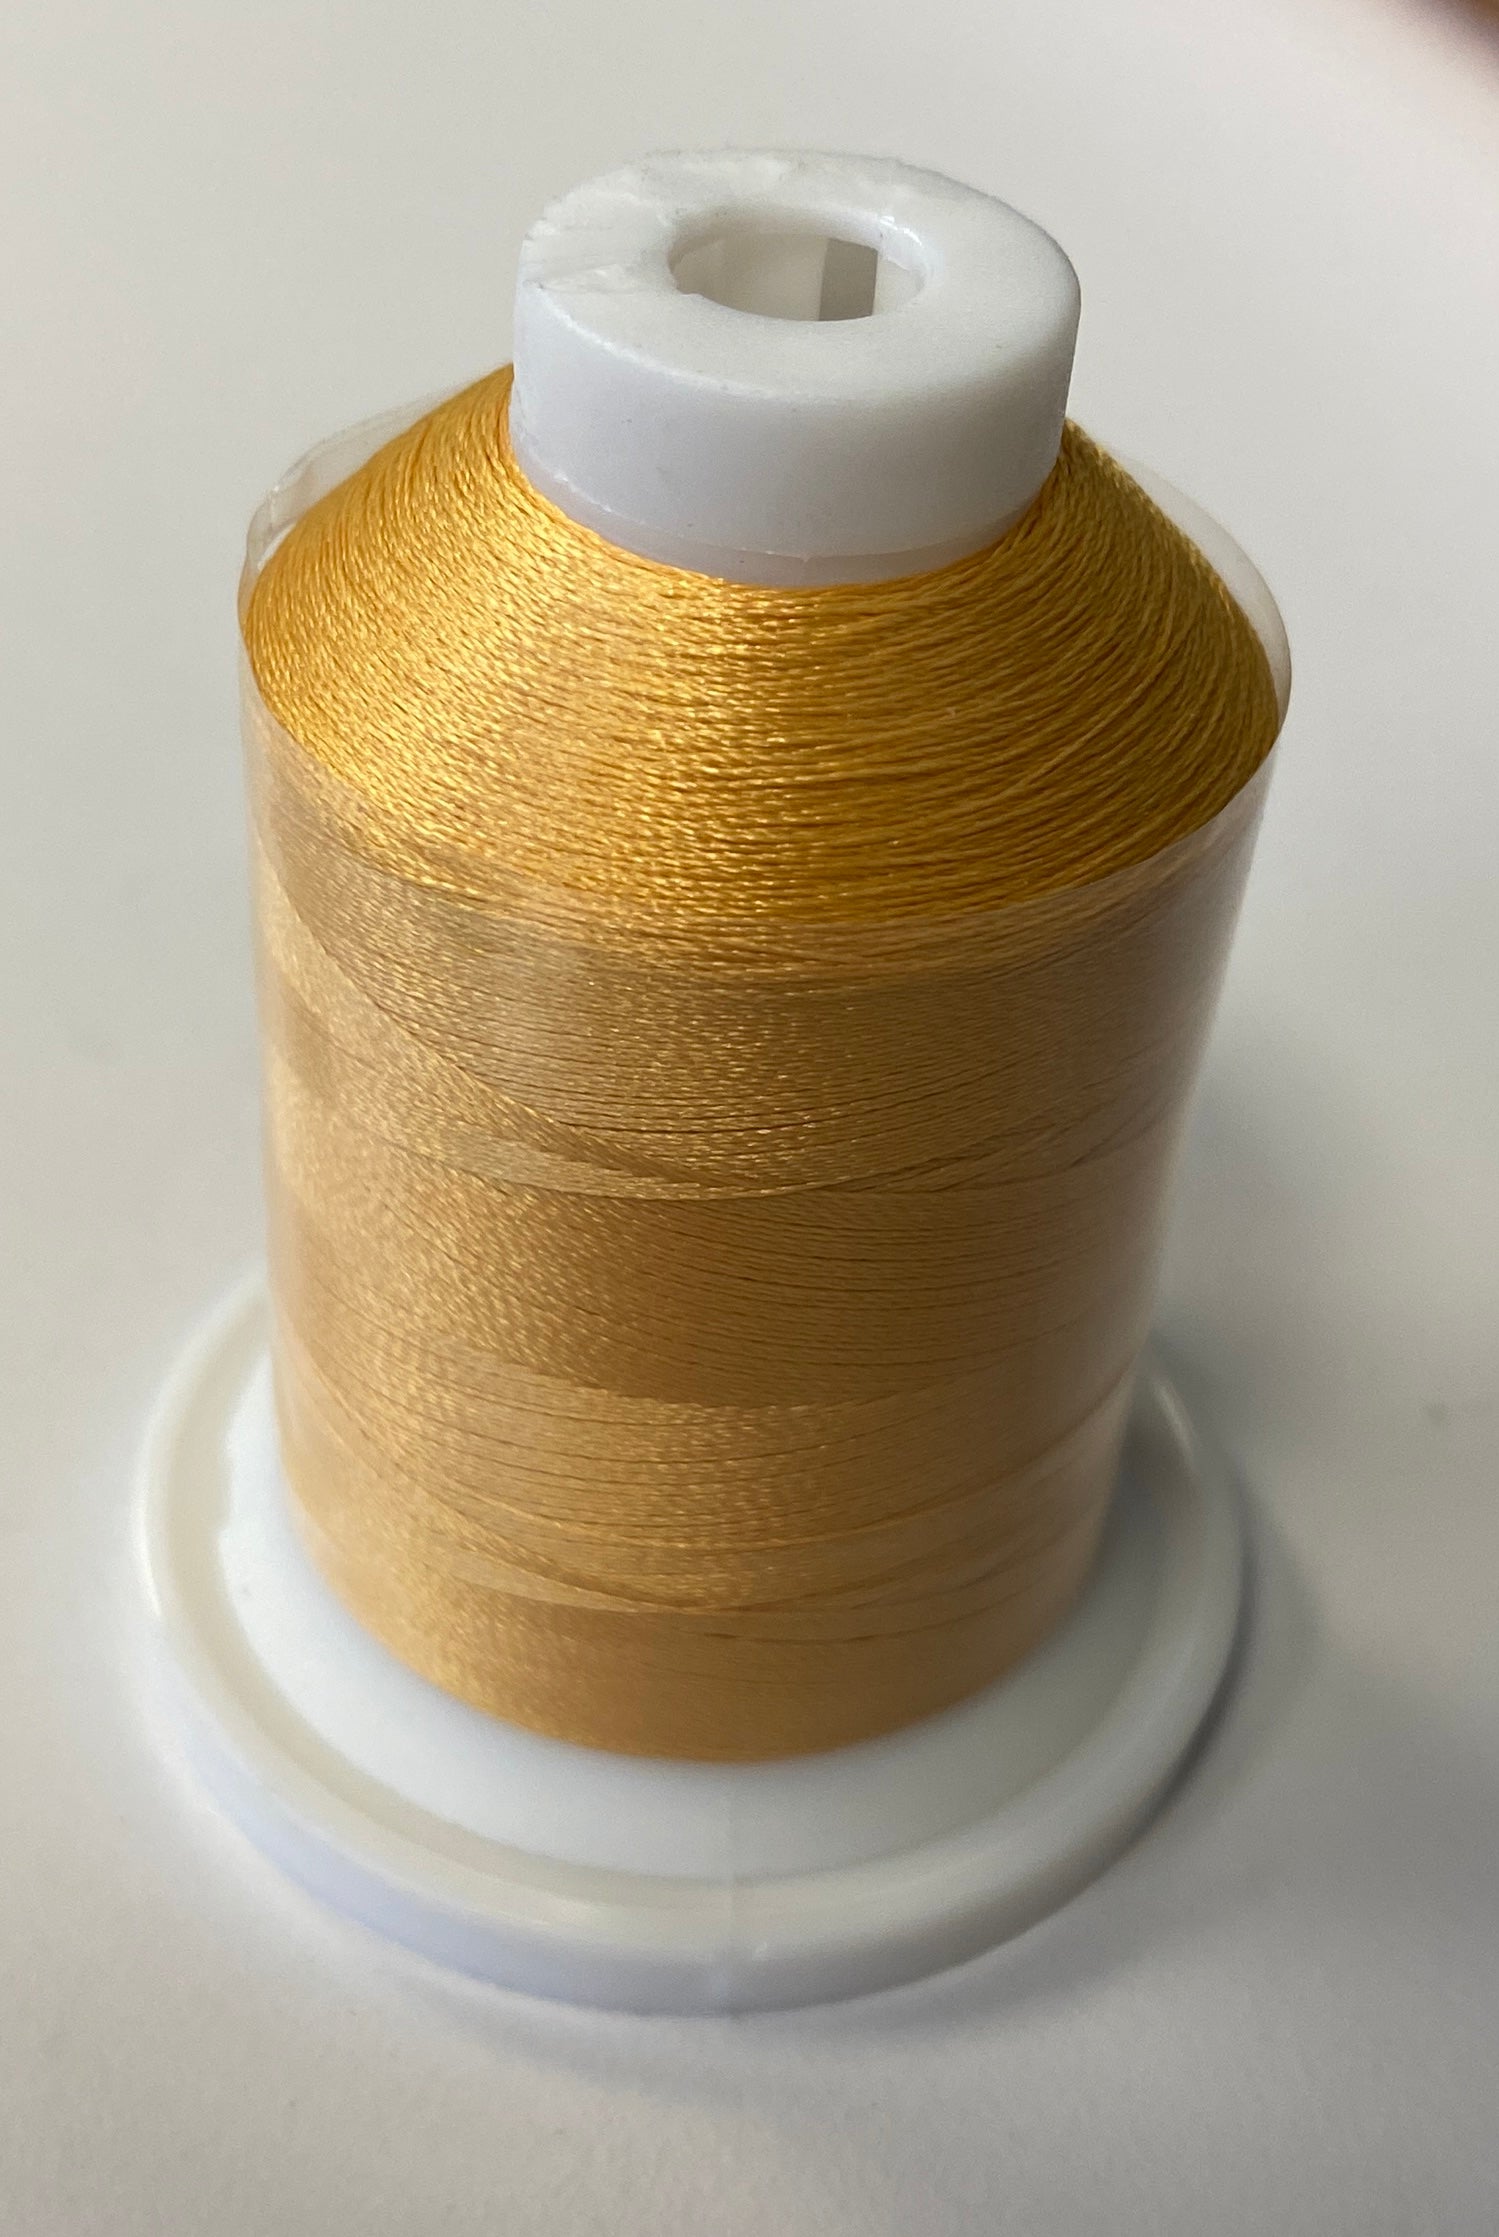 ETP800 Brother PaceSetter Pro Embroidery Thread - 1100 yd Spool